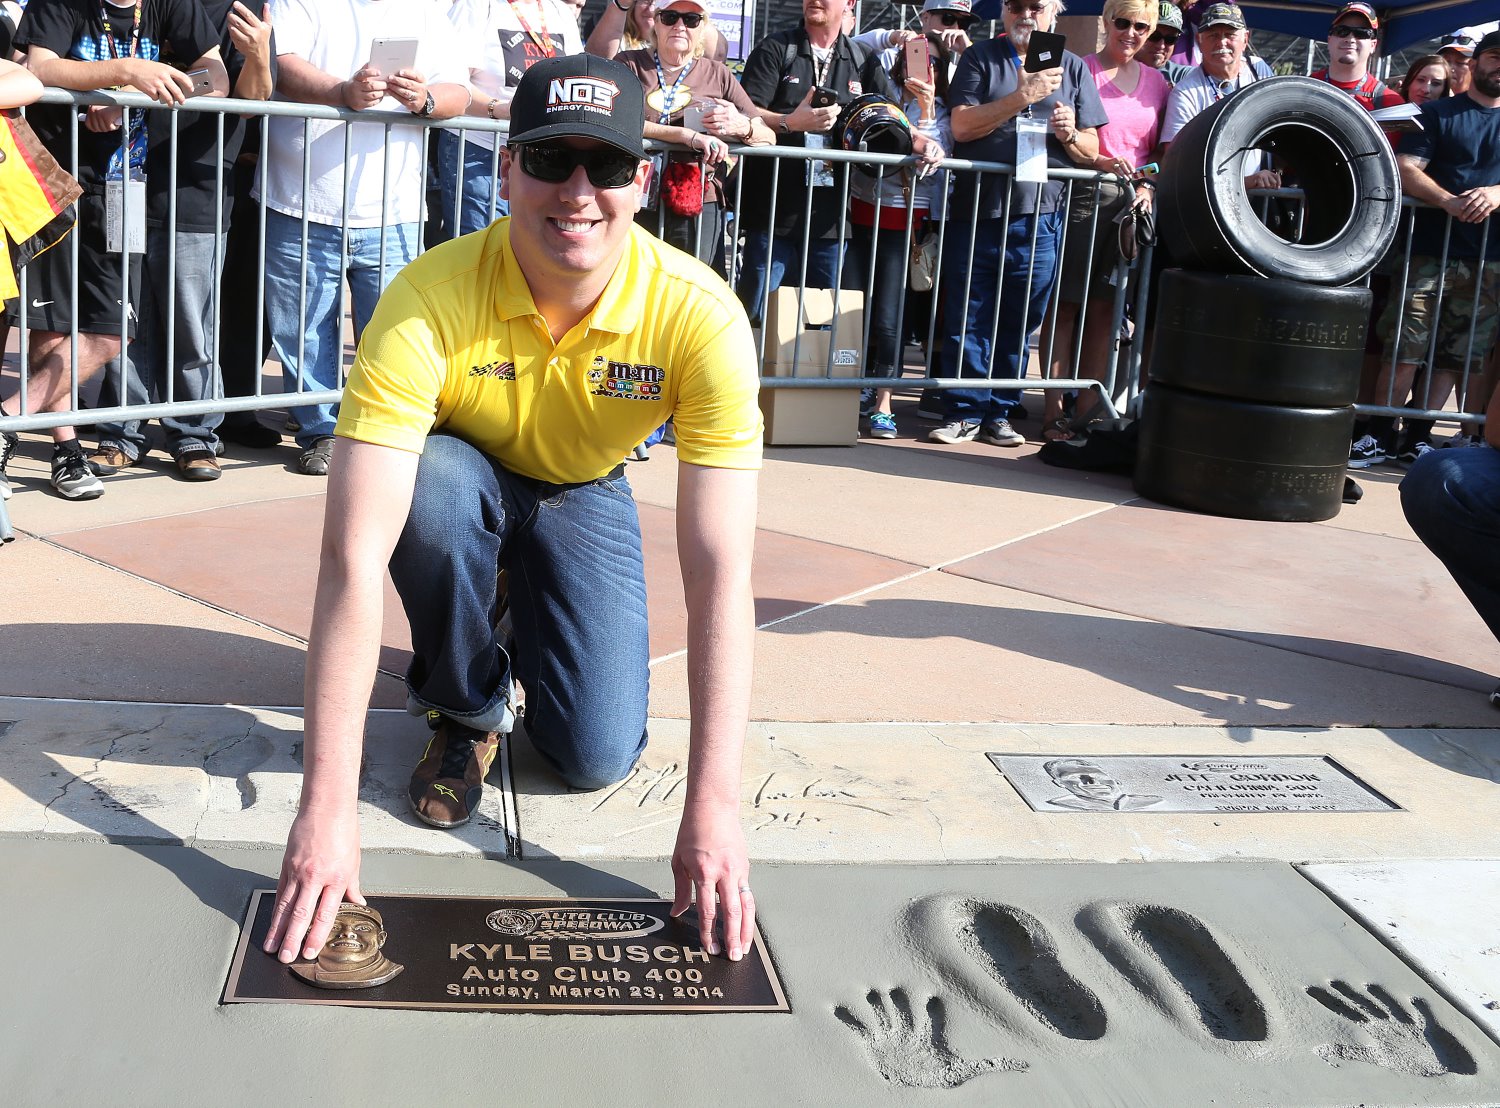 Kyle Busch gets his Walk of Fame Plaque at Fontana